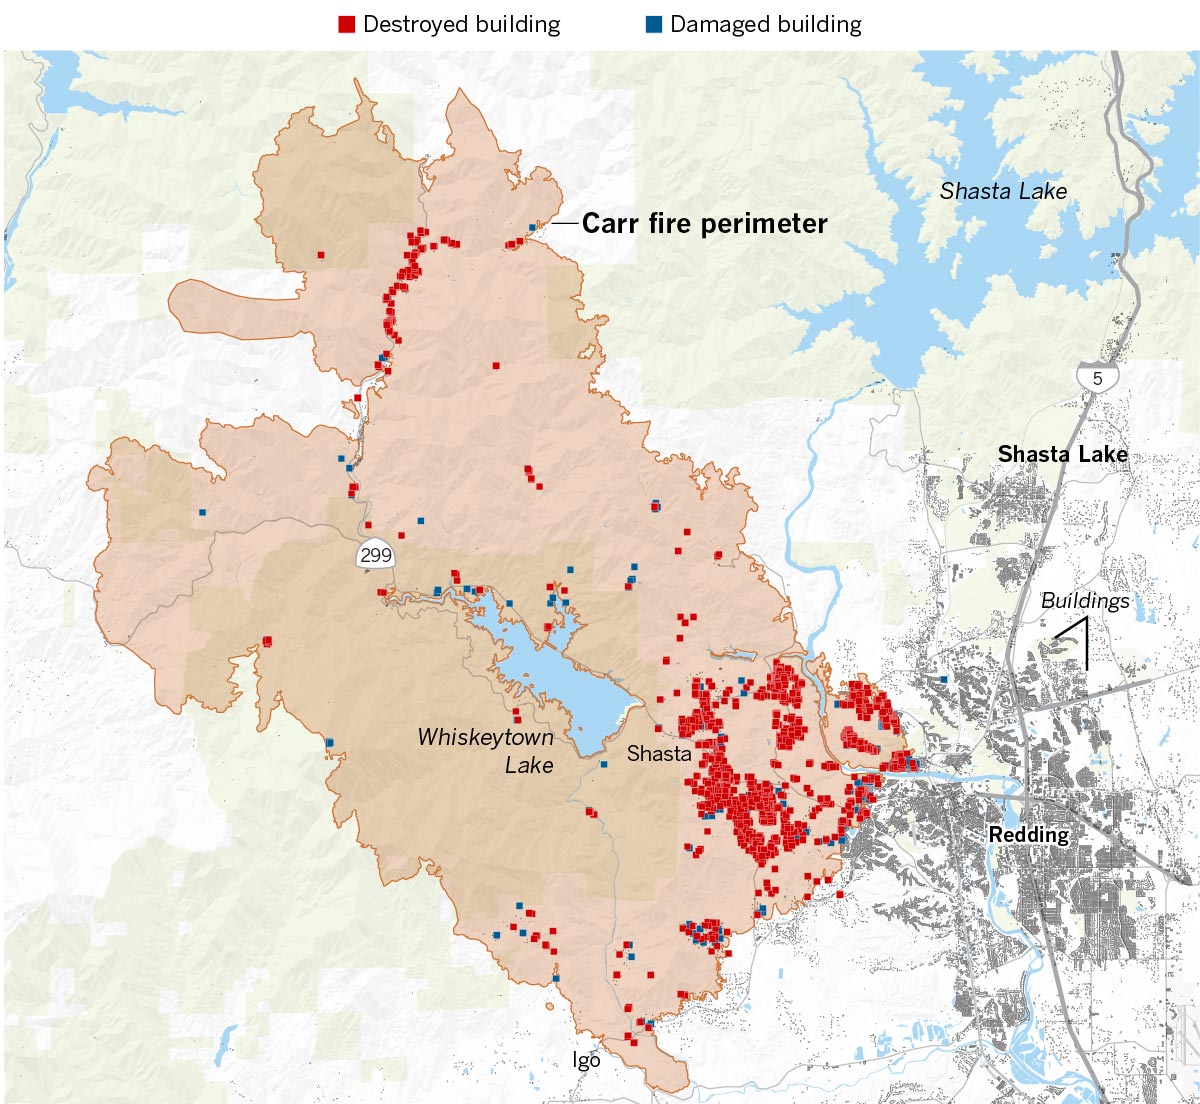 Here S Where The Carr Fire Destroyed Homes In Northern California Los Angeles Times